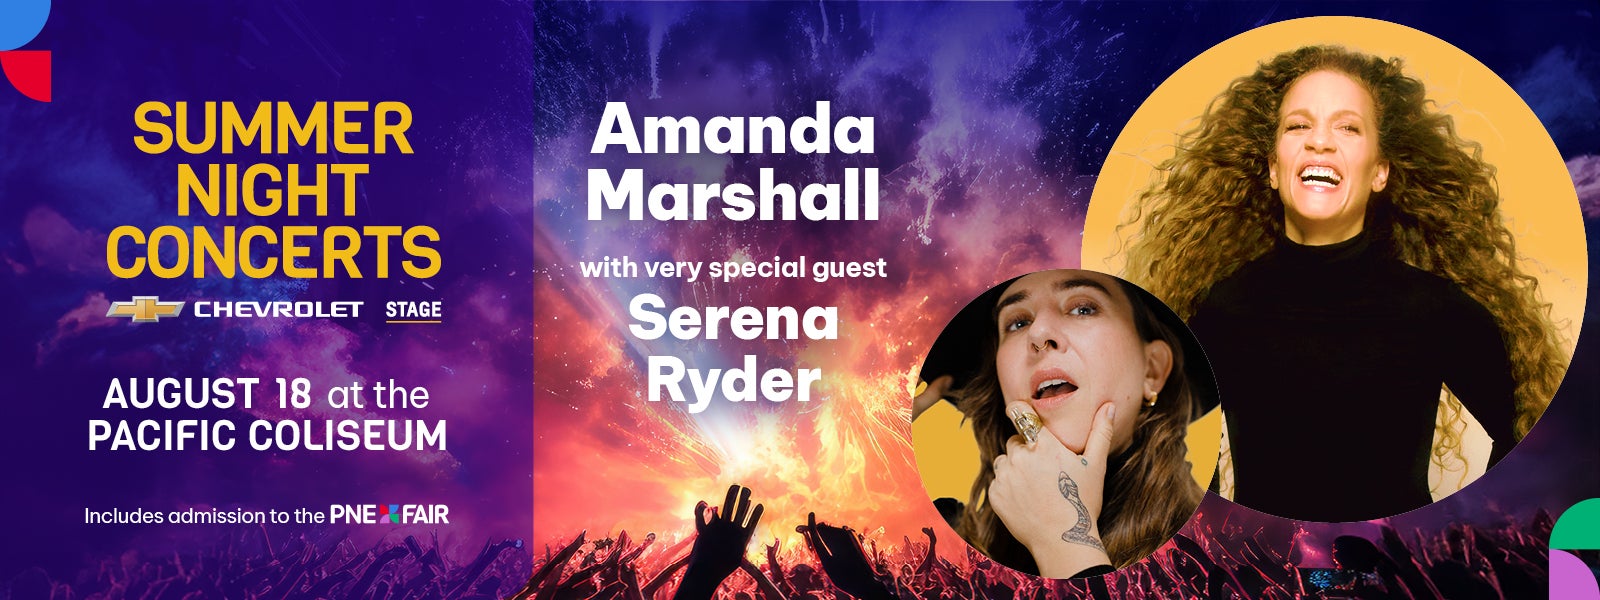 Amanda Marshall with very special guest Serena Ryder 